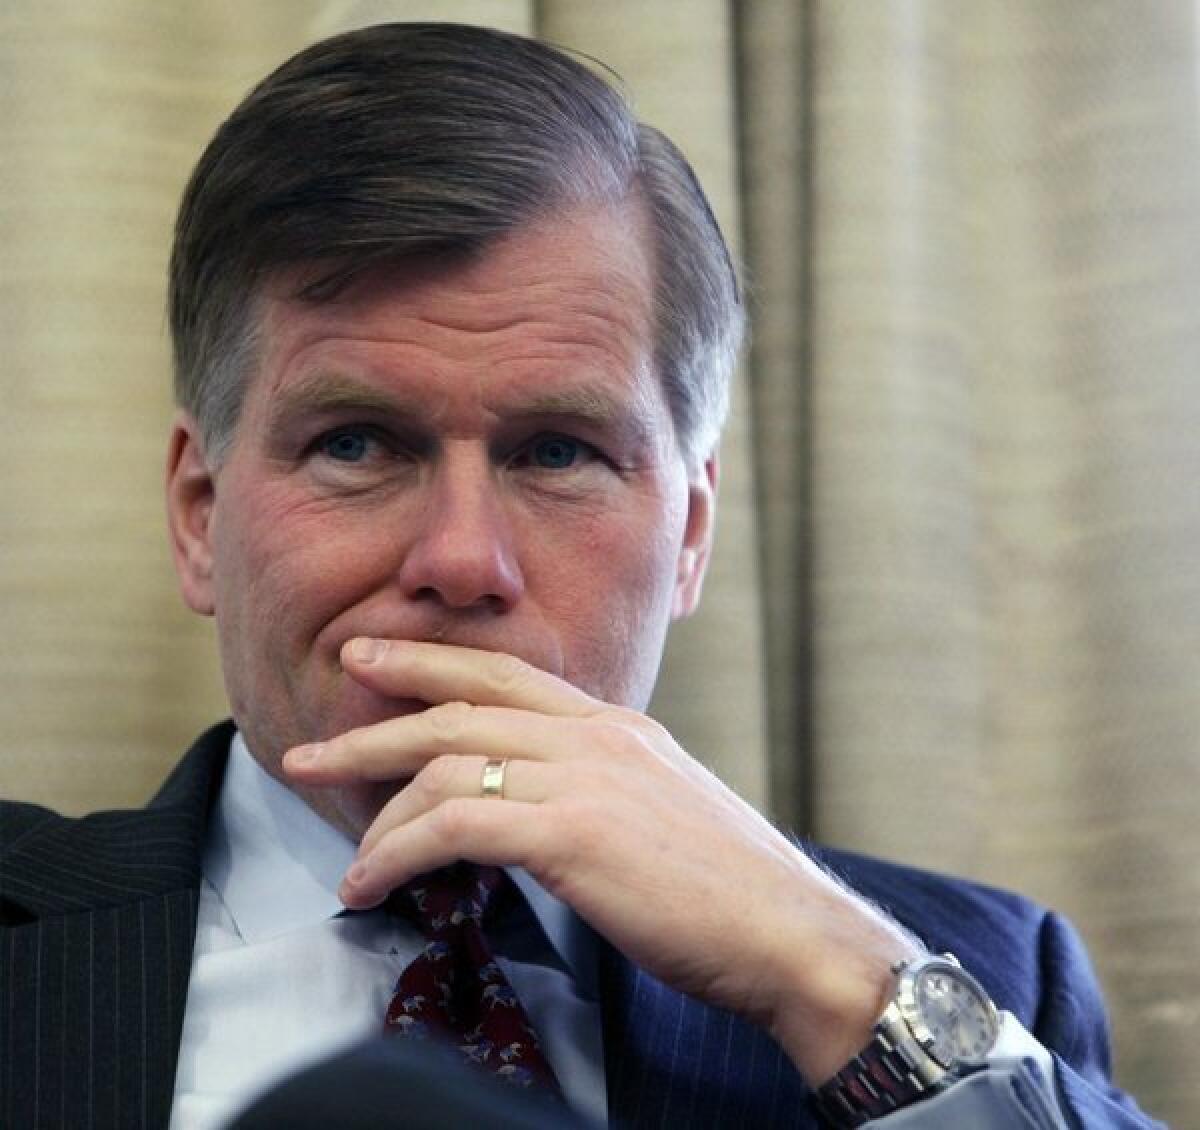 Virginia Gov. Bob McDonnell wears a Rolex during an interview in his office in Richmond, Va.